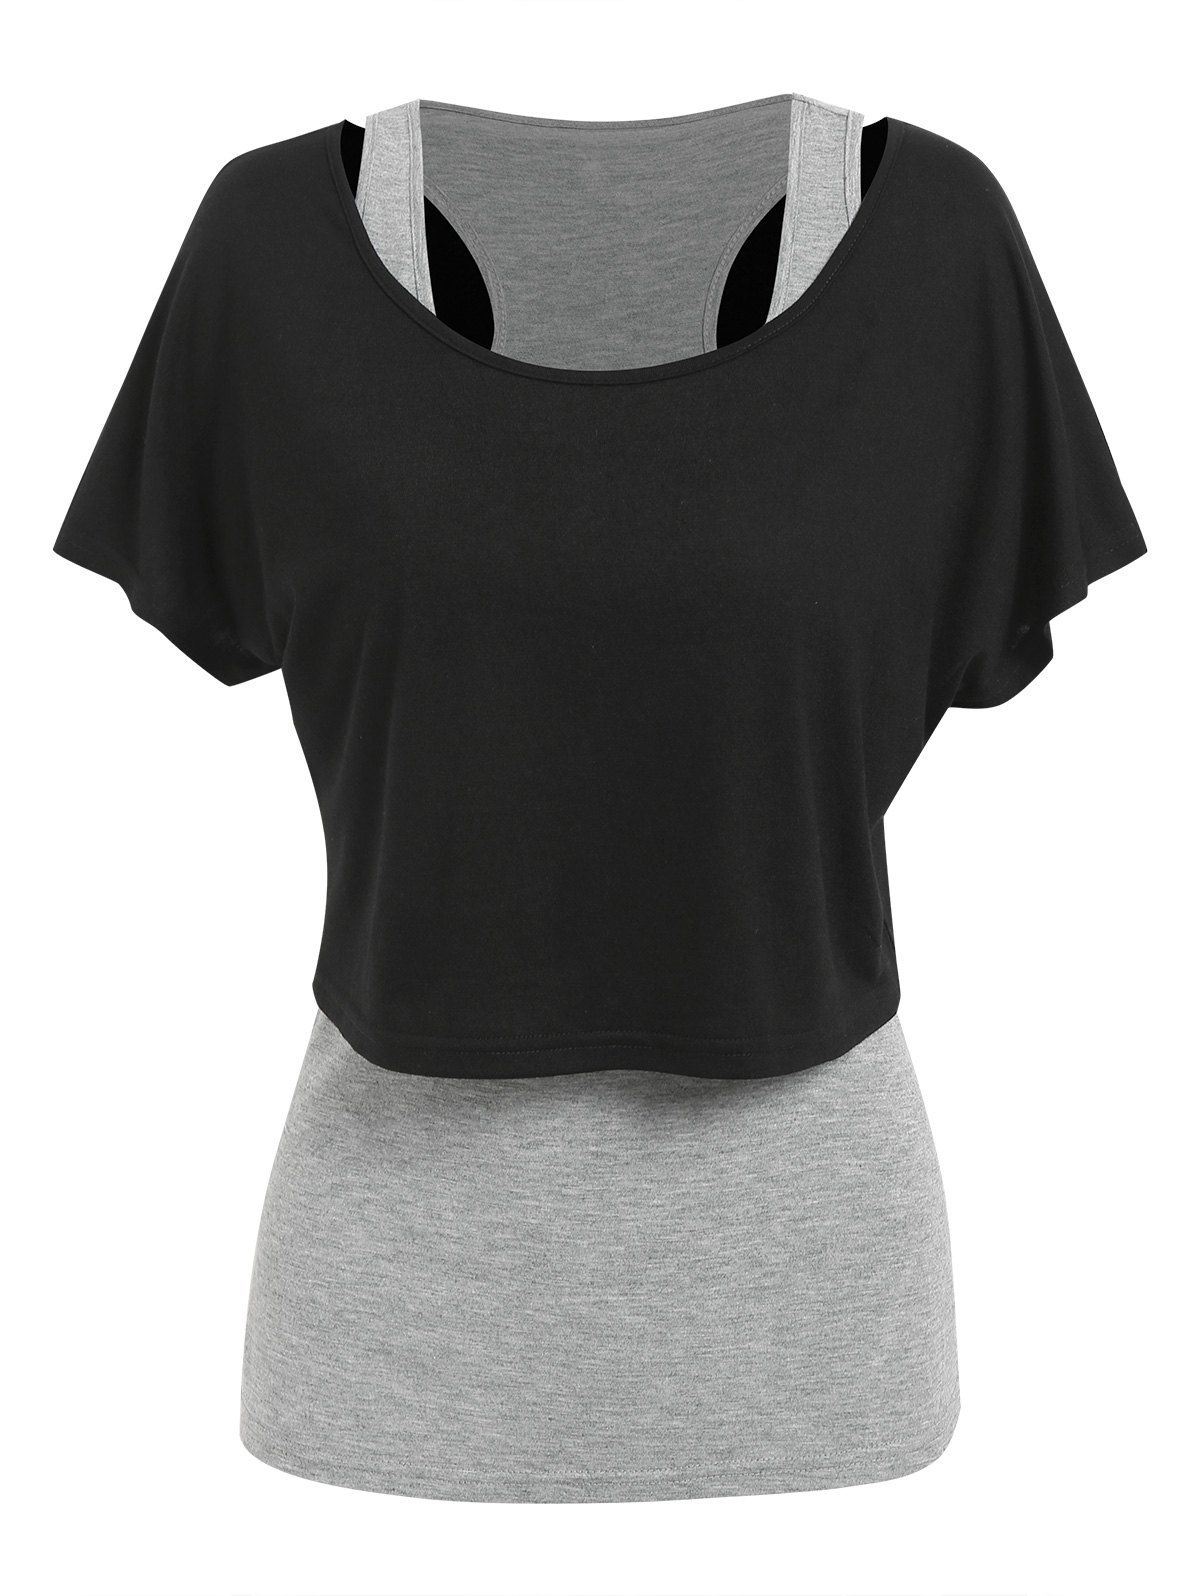 Sporty Cropped Plain Scoop Neck T Shirt and Heathered Tank Top Set - multicolor XXL